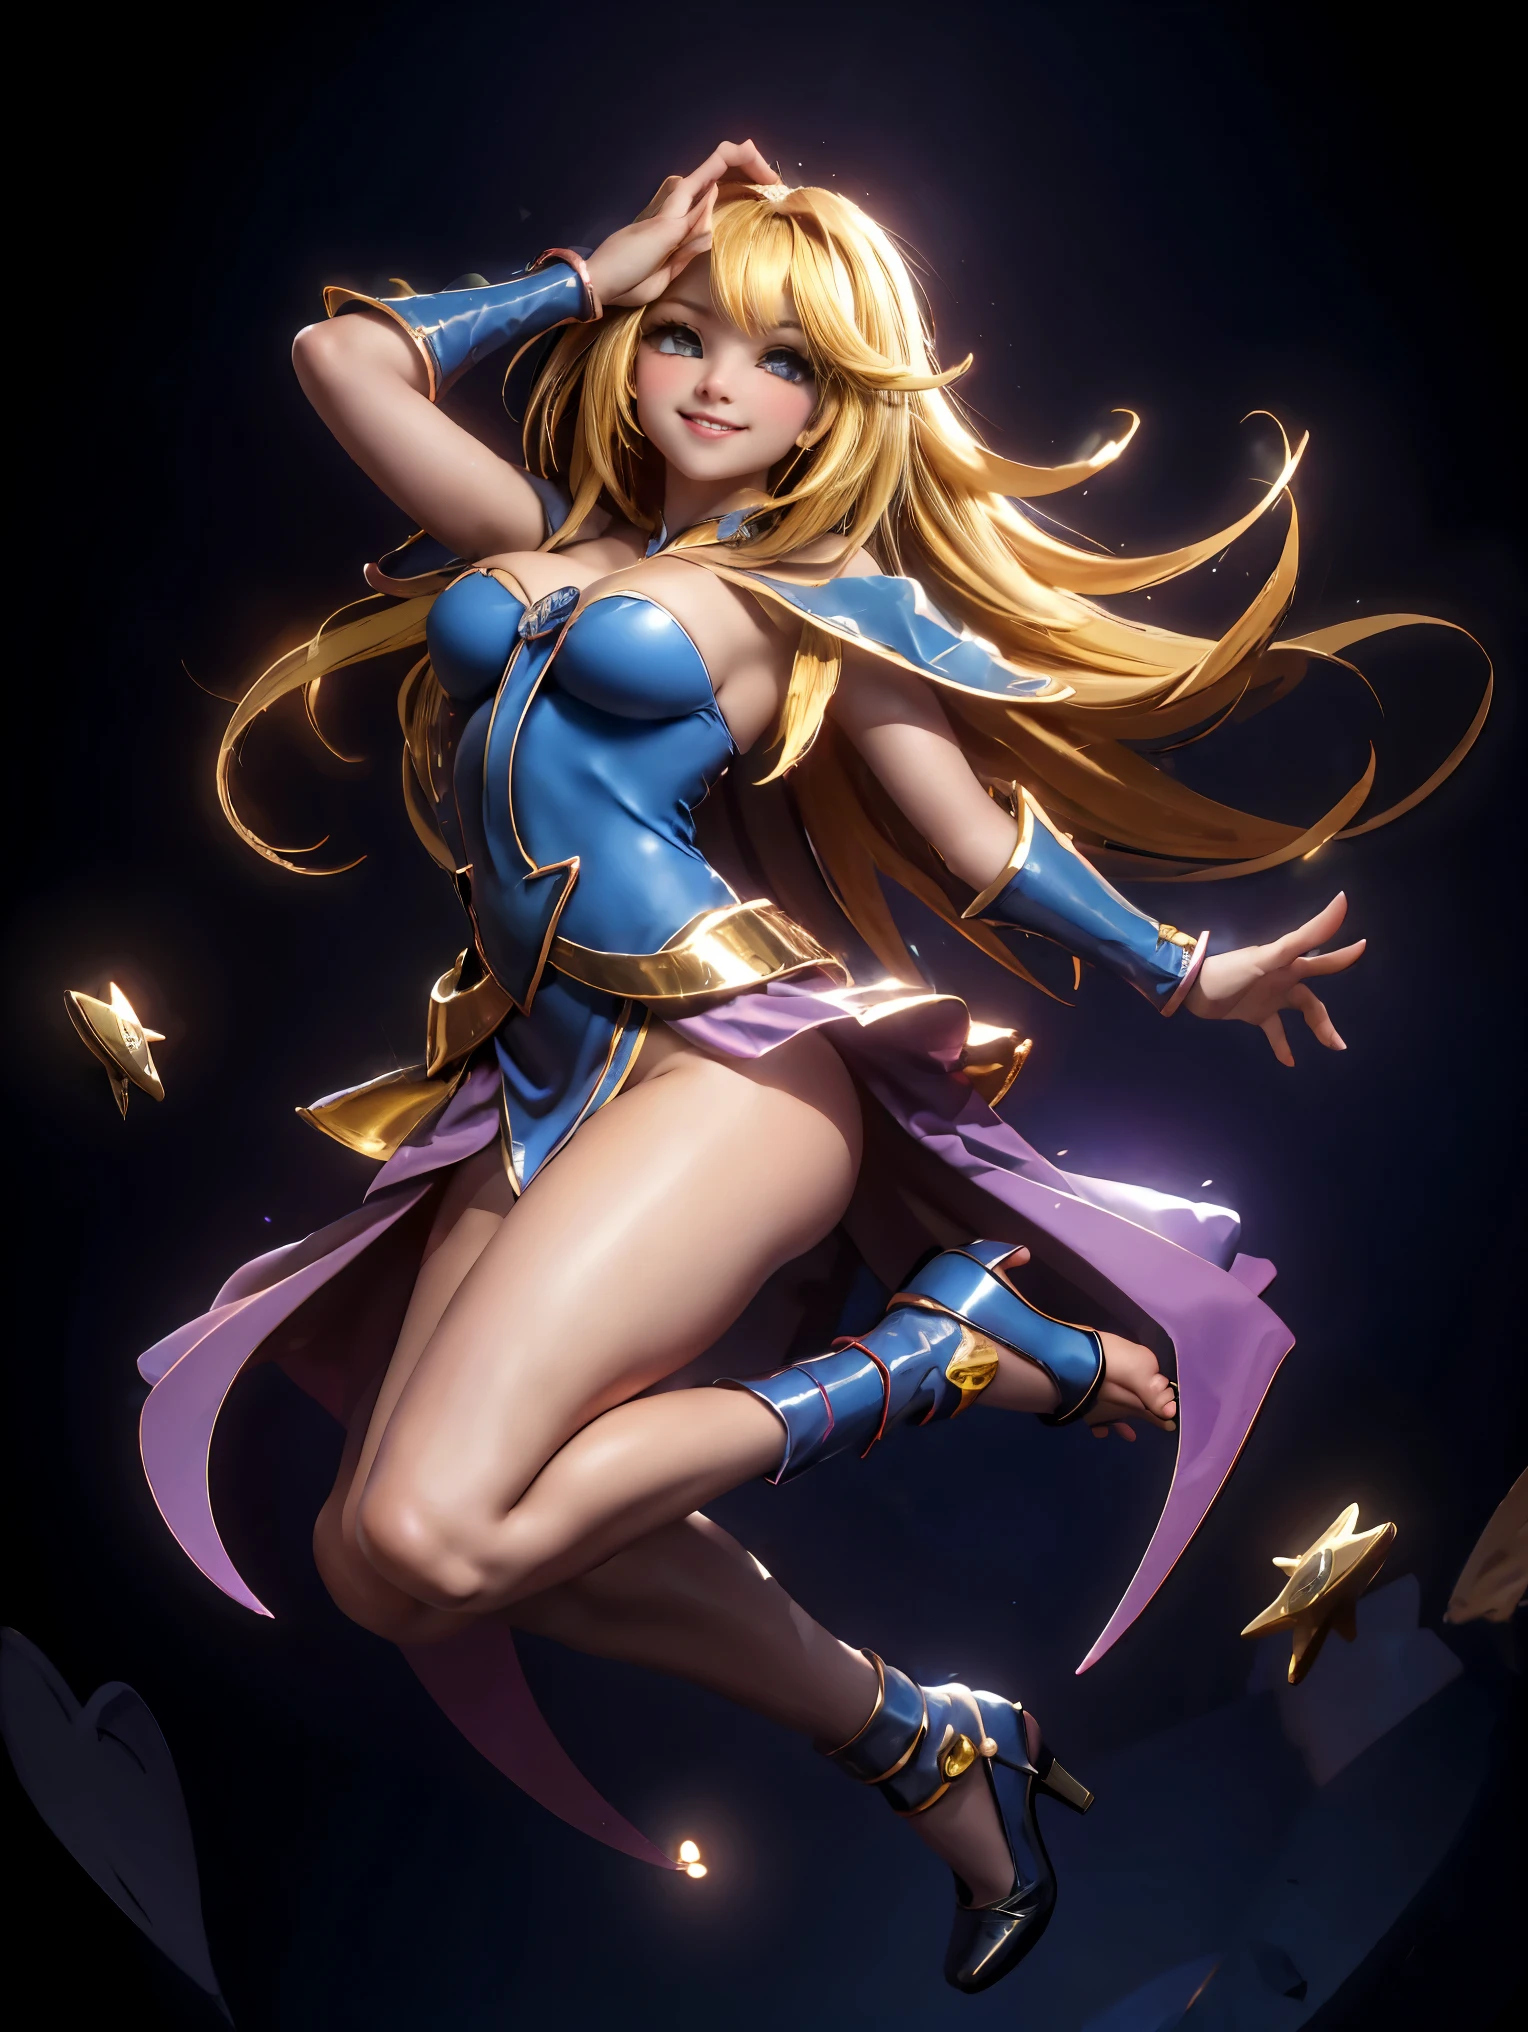 Dark magician gils in the air, she is standing jumping, Magic hearts background. smile on his lips. blue eyes. Golden hair. pose sensual. Levitating on one foot. has heels. 1.1 Wear heels azules y dorados . Wear heels 